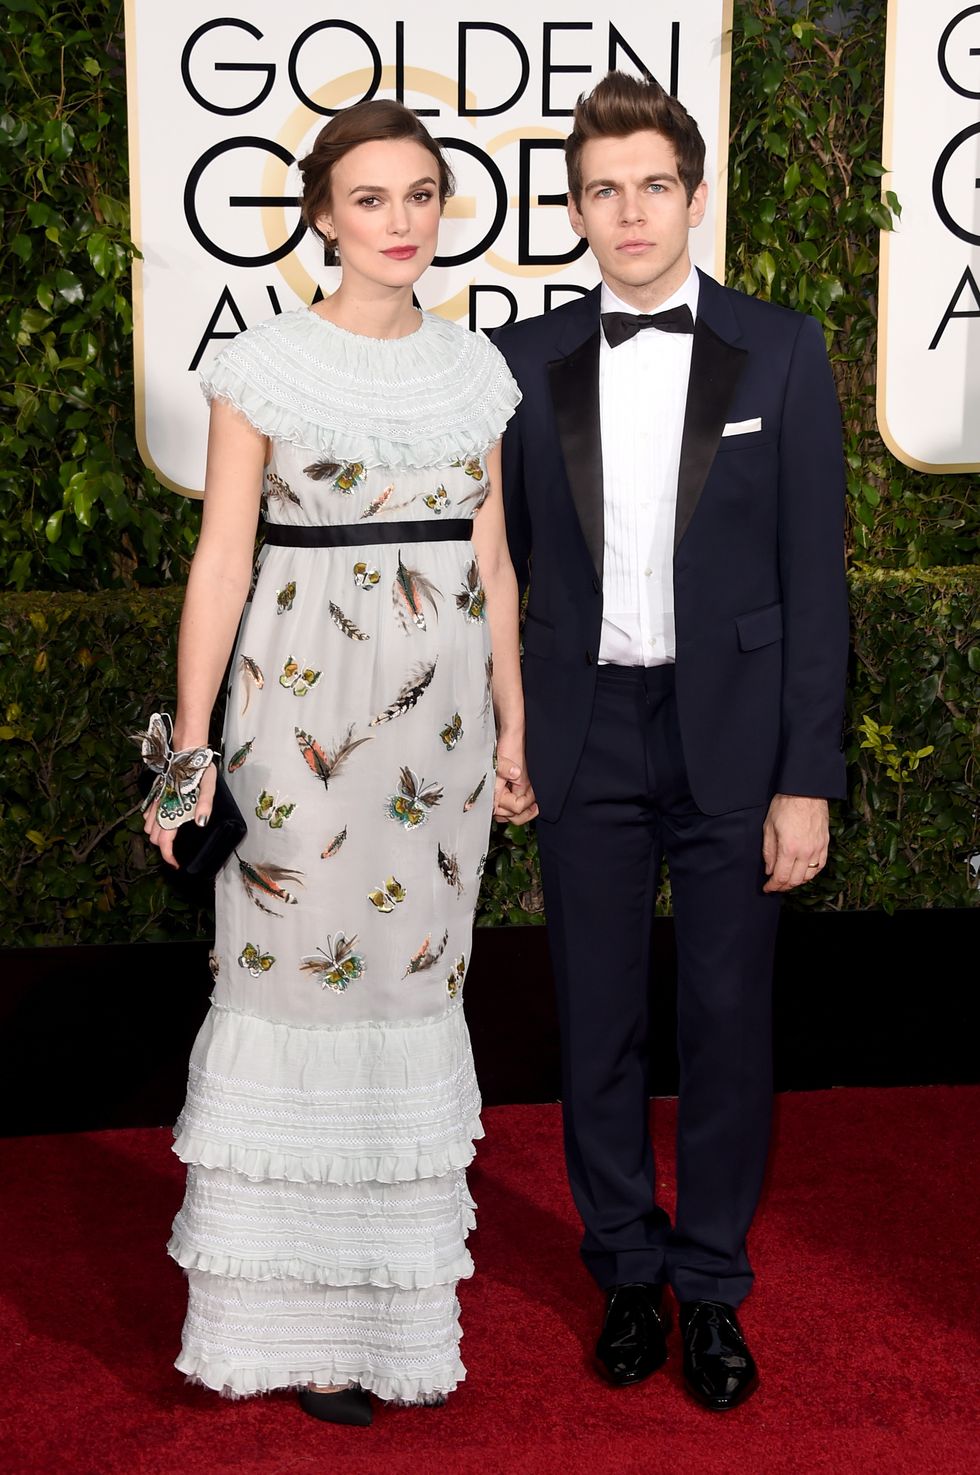 Keira Knightley and husband James Righton at the Golden Globes 2015